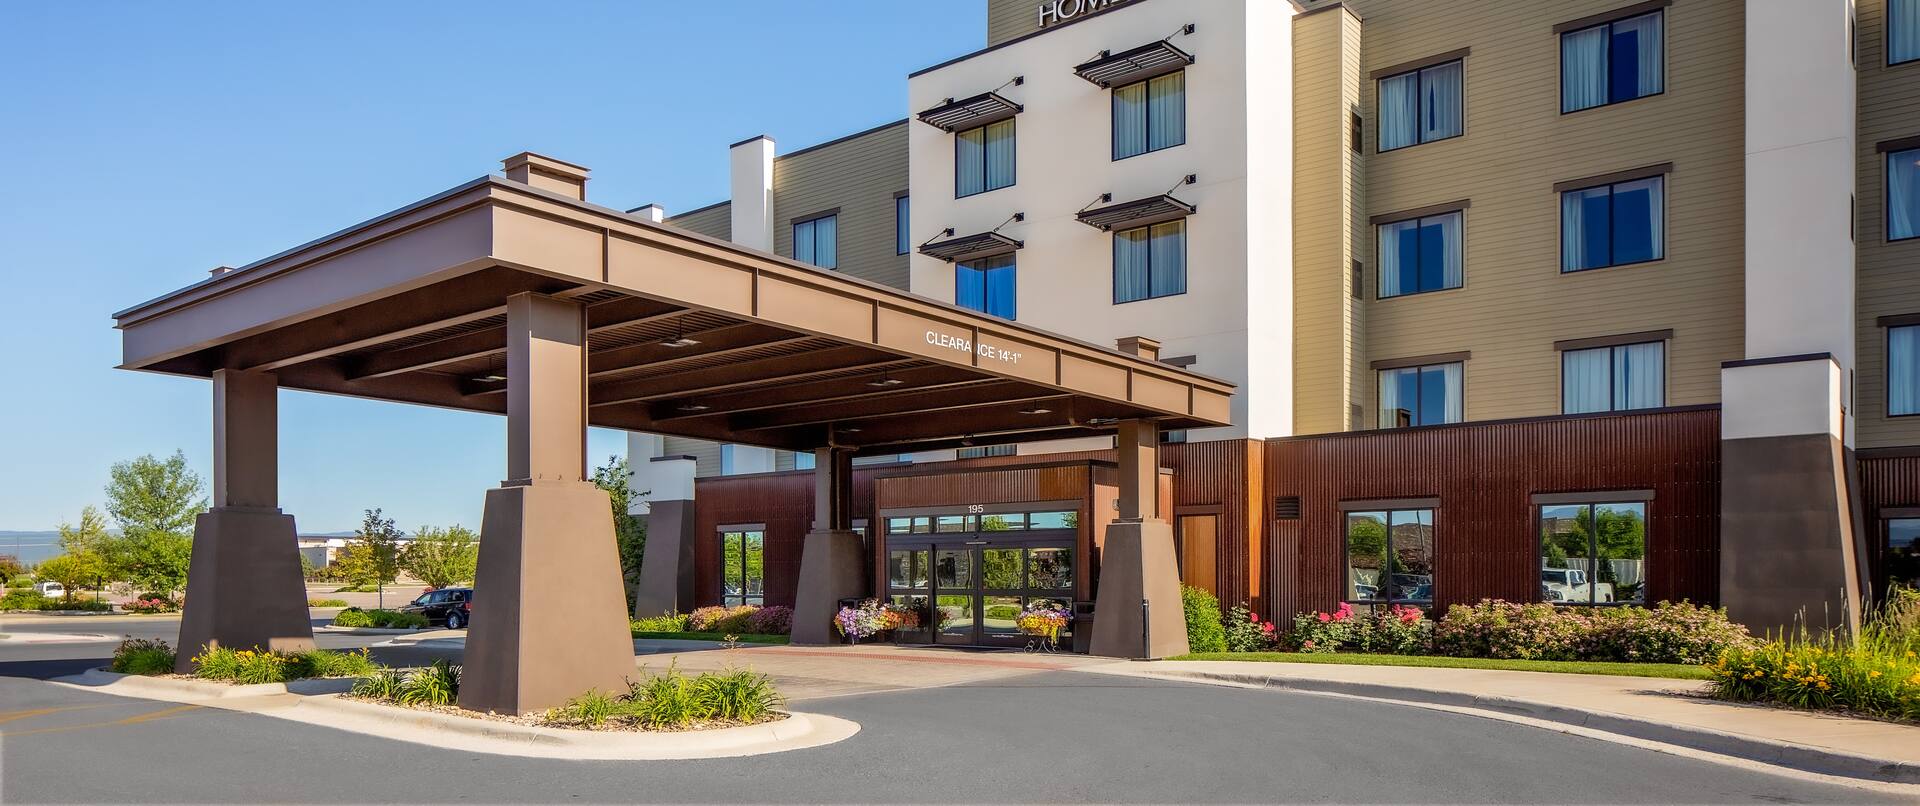 Homewood Suites by Hilton Kalispell Hotel Exterior